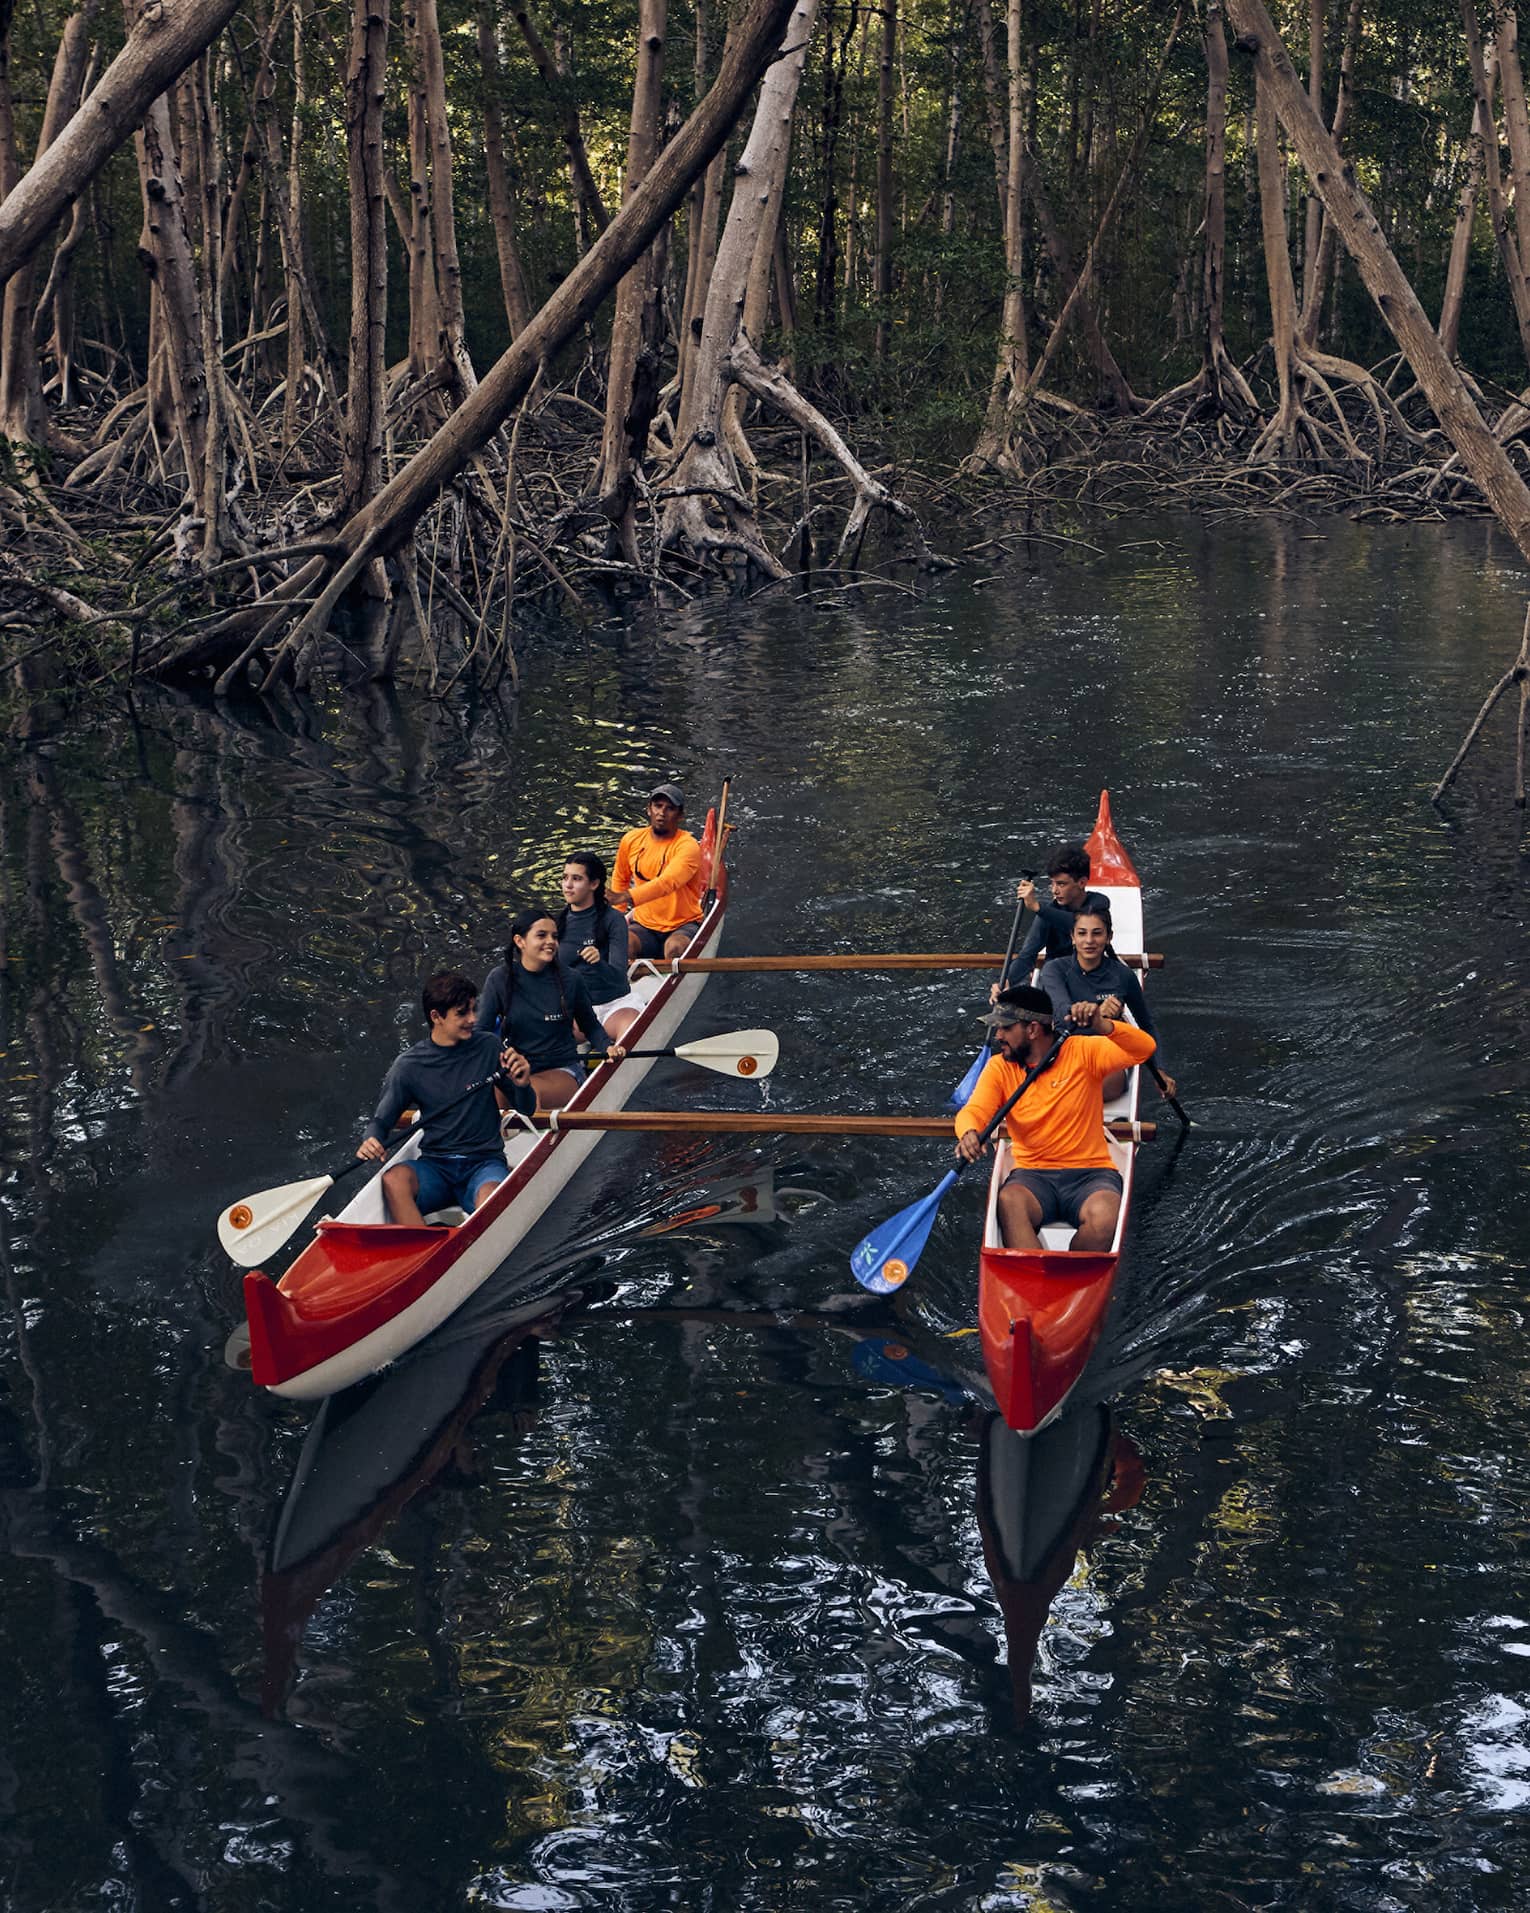 Two red-and-white canoes each holding four people glide through the water between mangrove trees